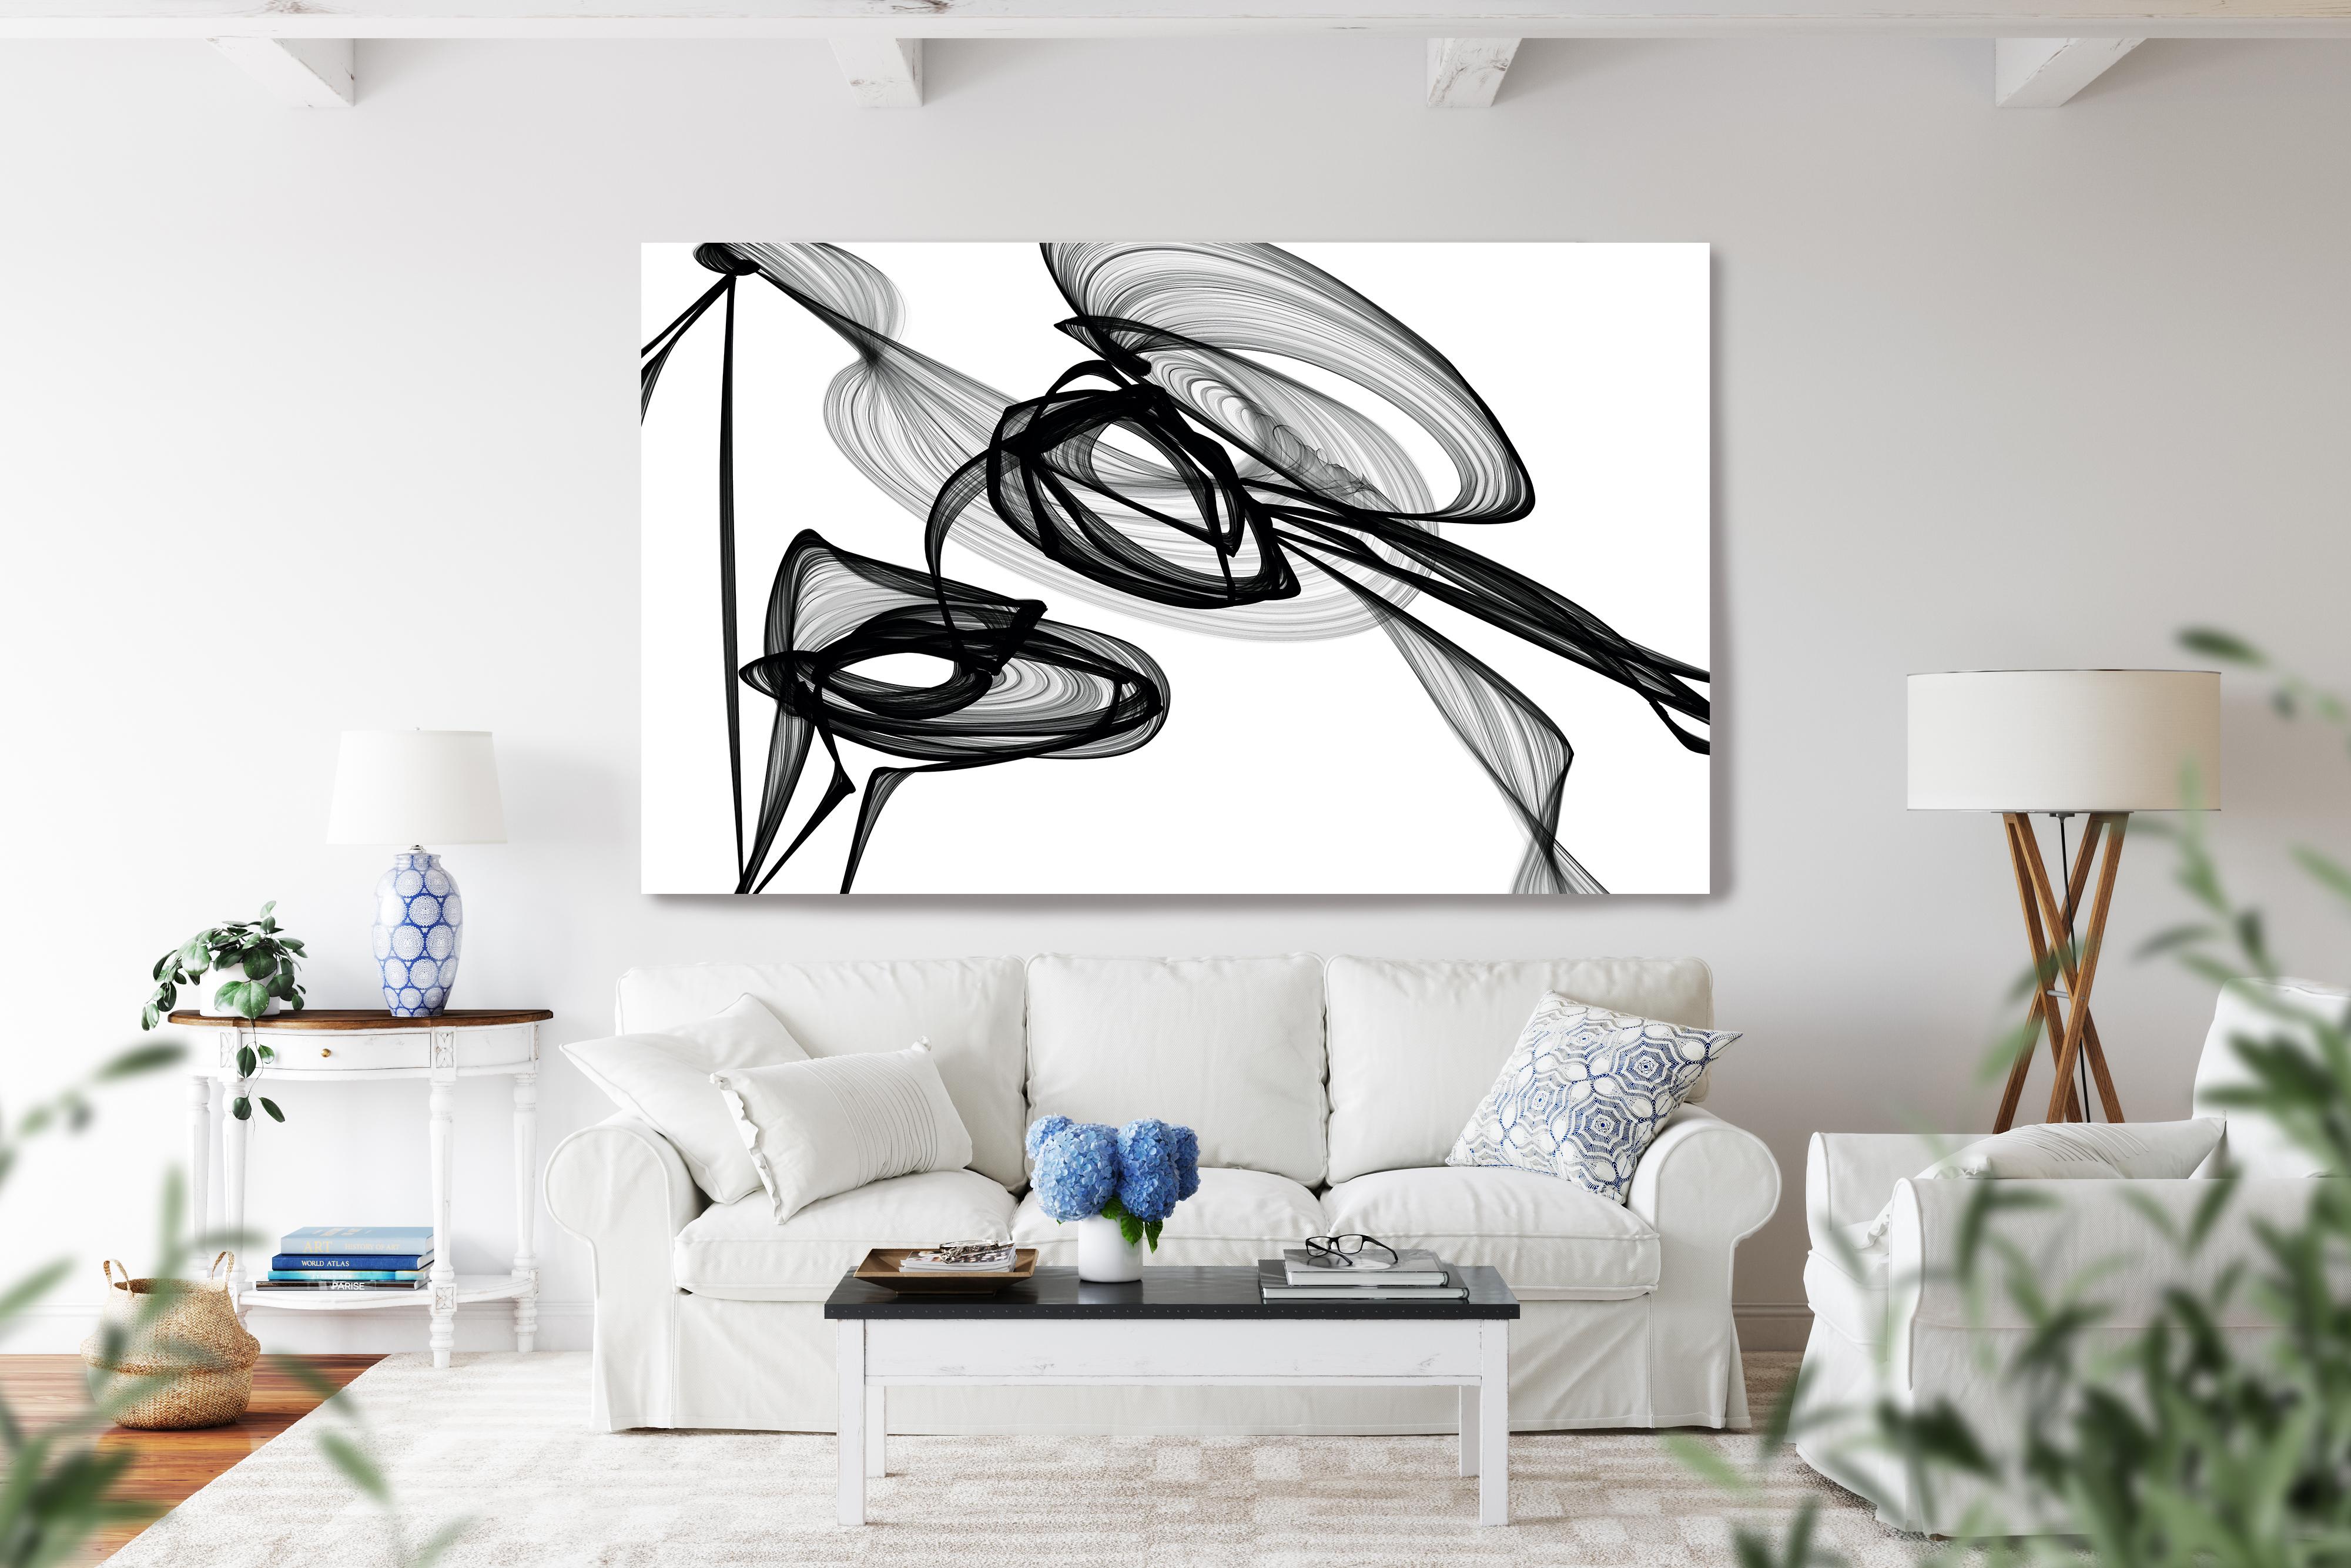 Irena Orlov Interior Painting - Black White Minimalist New Media Painting on Canvas, 44x72" What did you see?